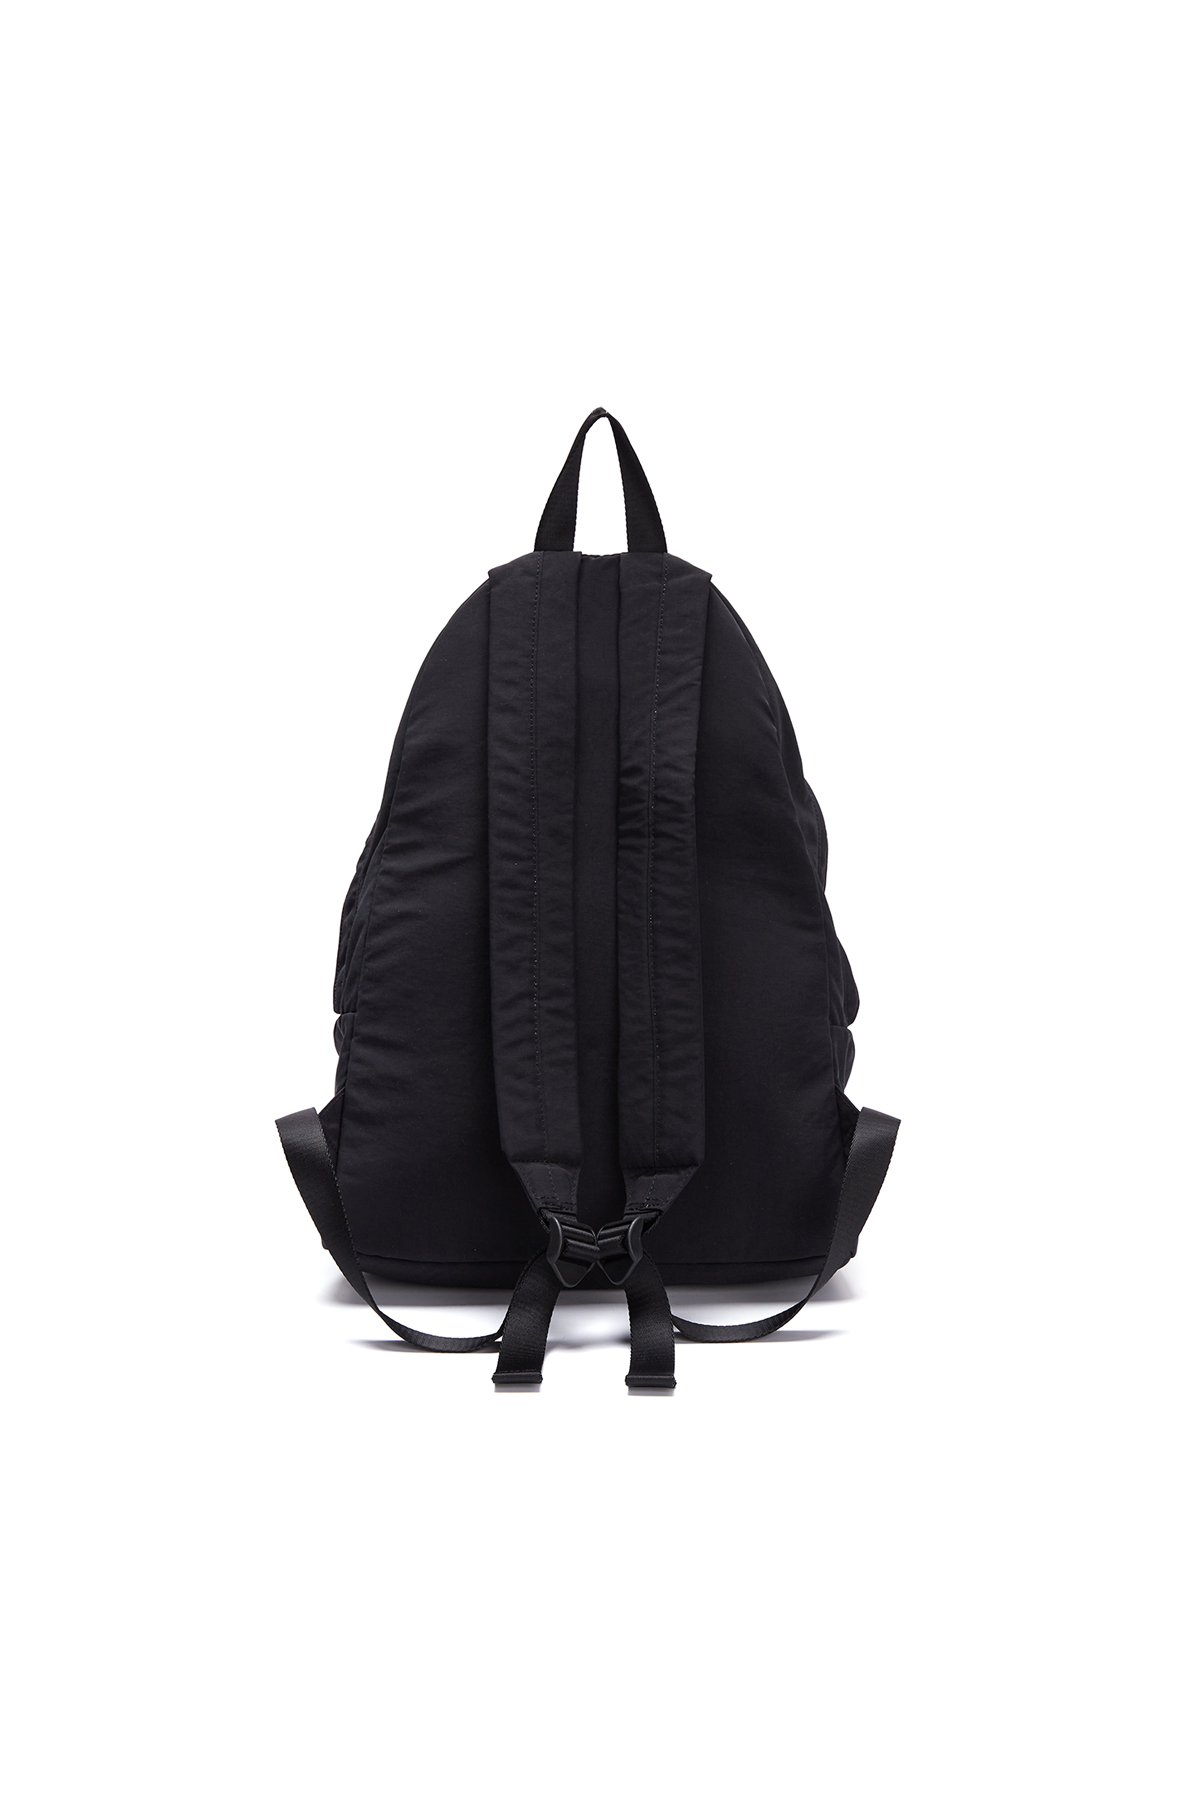 CARGO ALL DAY BACK PACK IN BLACK - MATINKIM